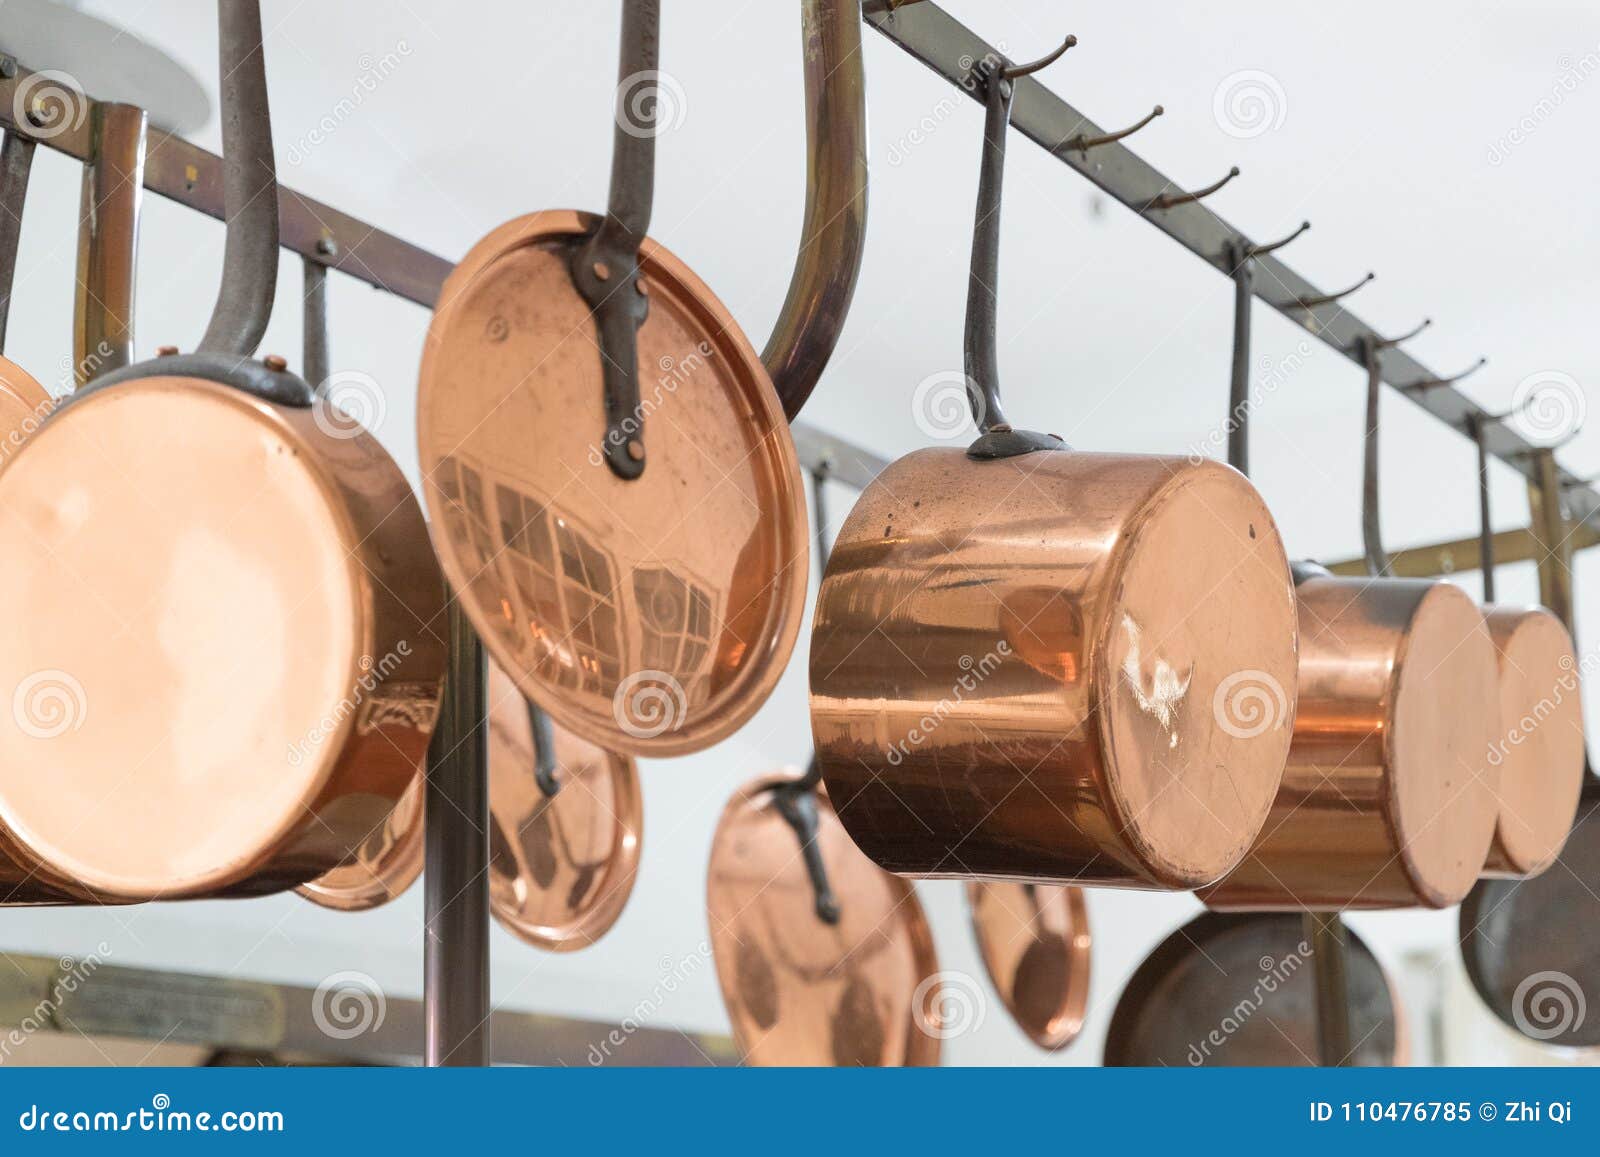 Copper Kitchenware Pots Pans Jugs Hang From The Ceiling In The